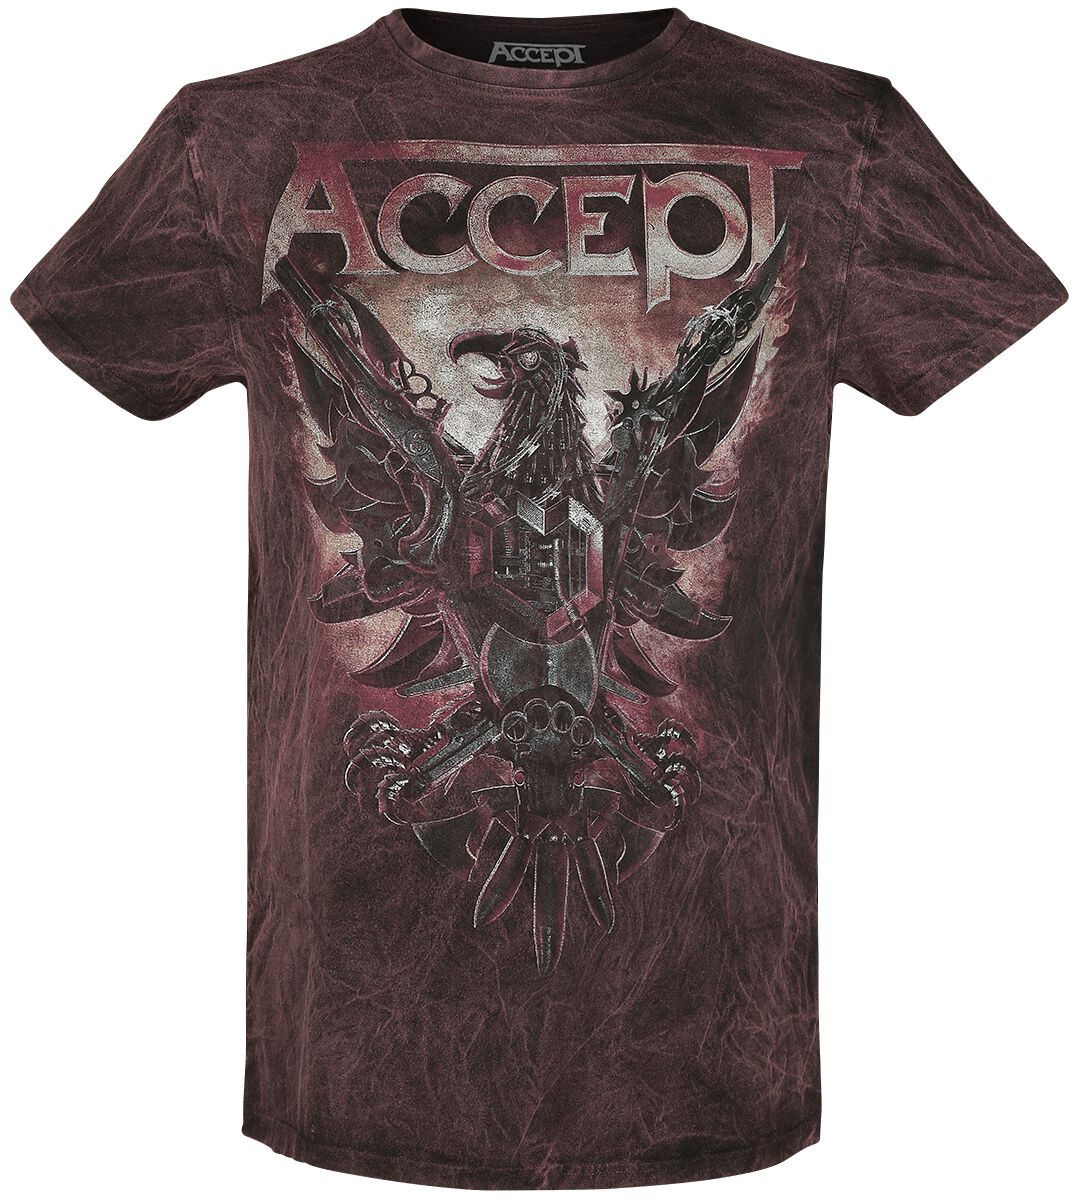 Image of Accept Eagle T-Shirt rost